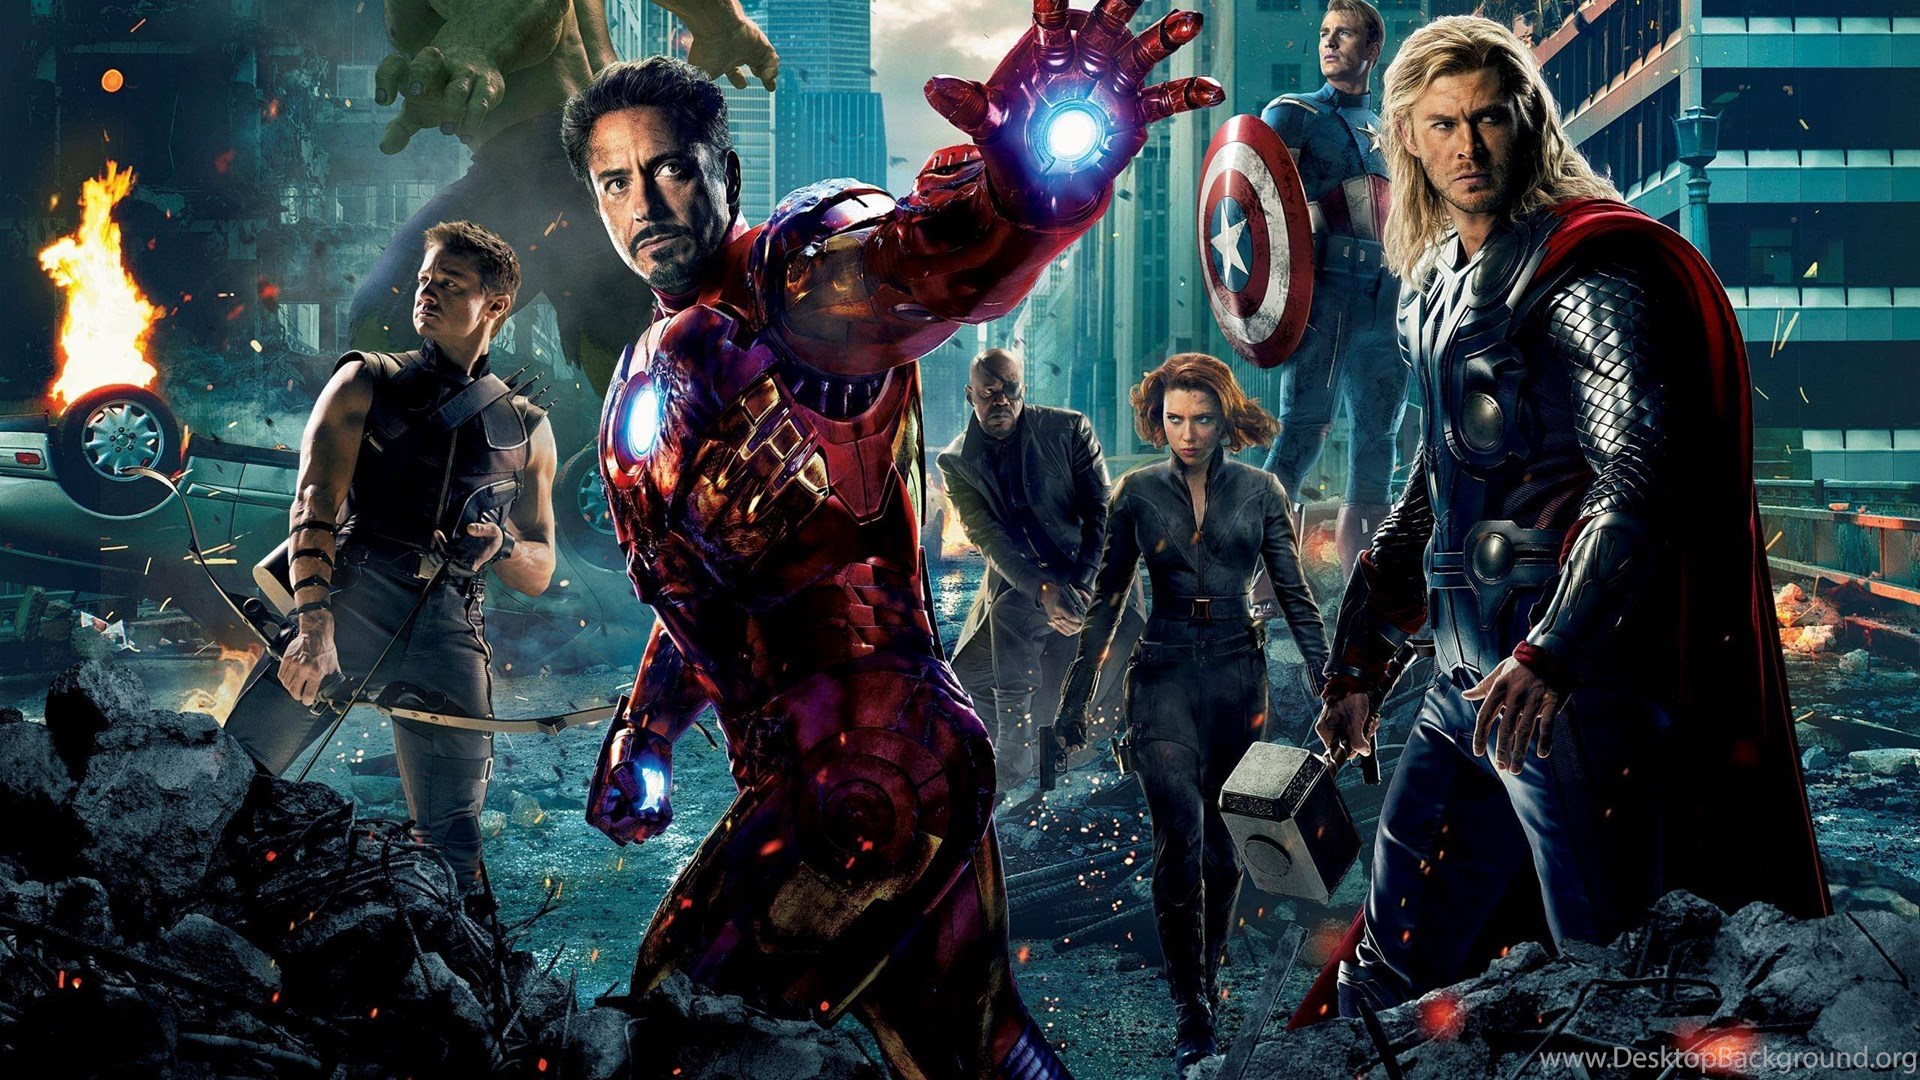 The Avengers 2012 Movie Story Summary & Review